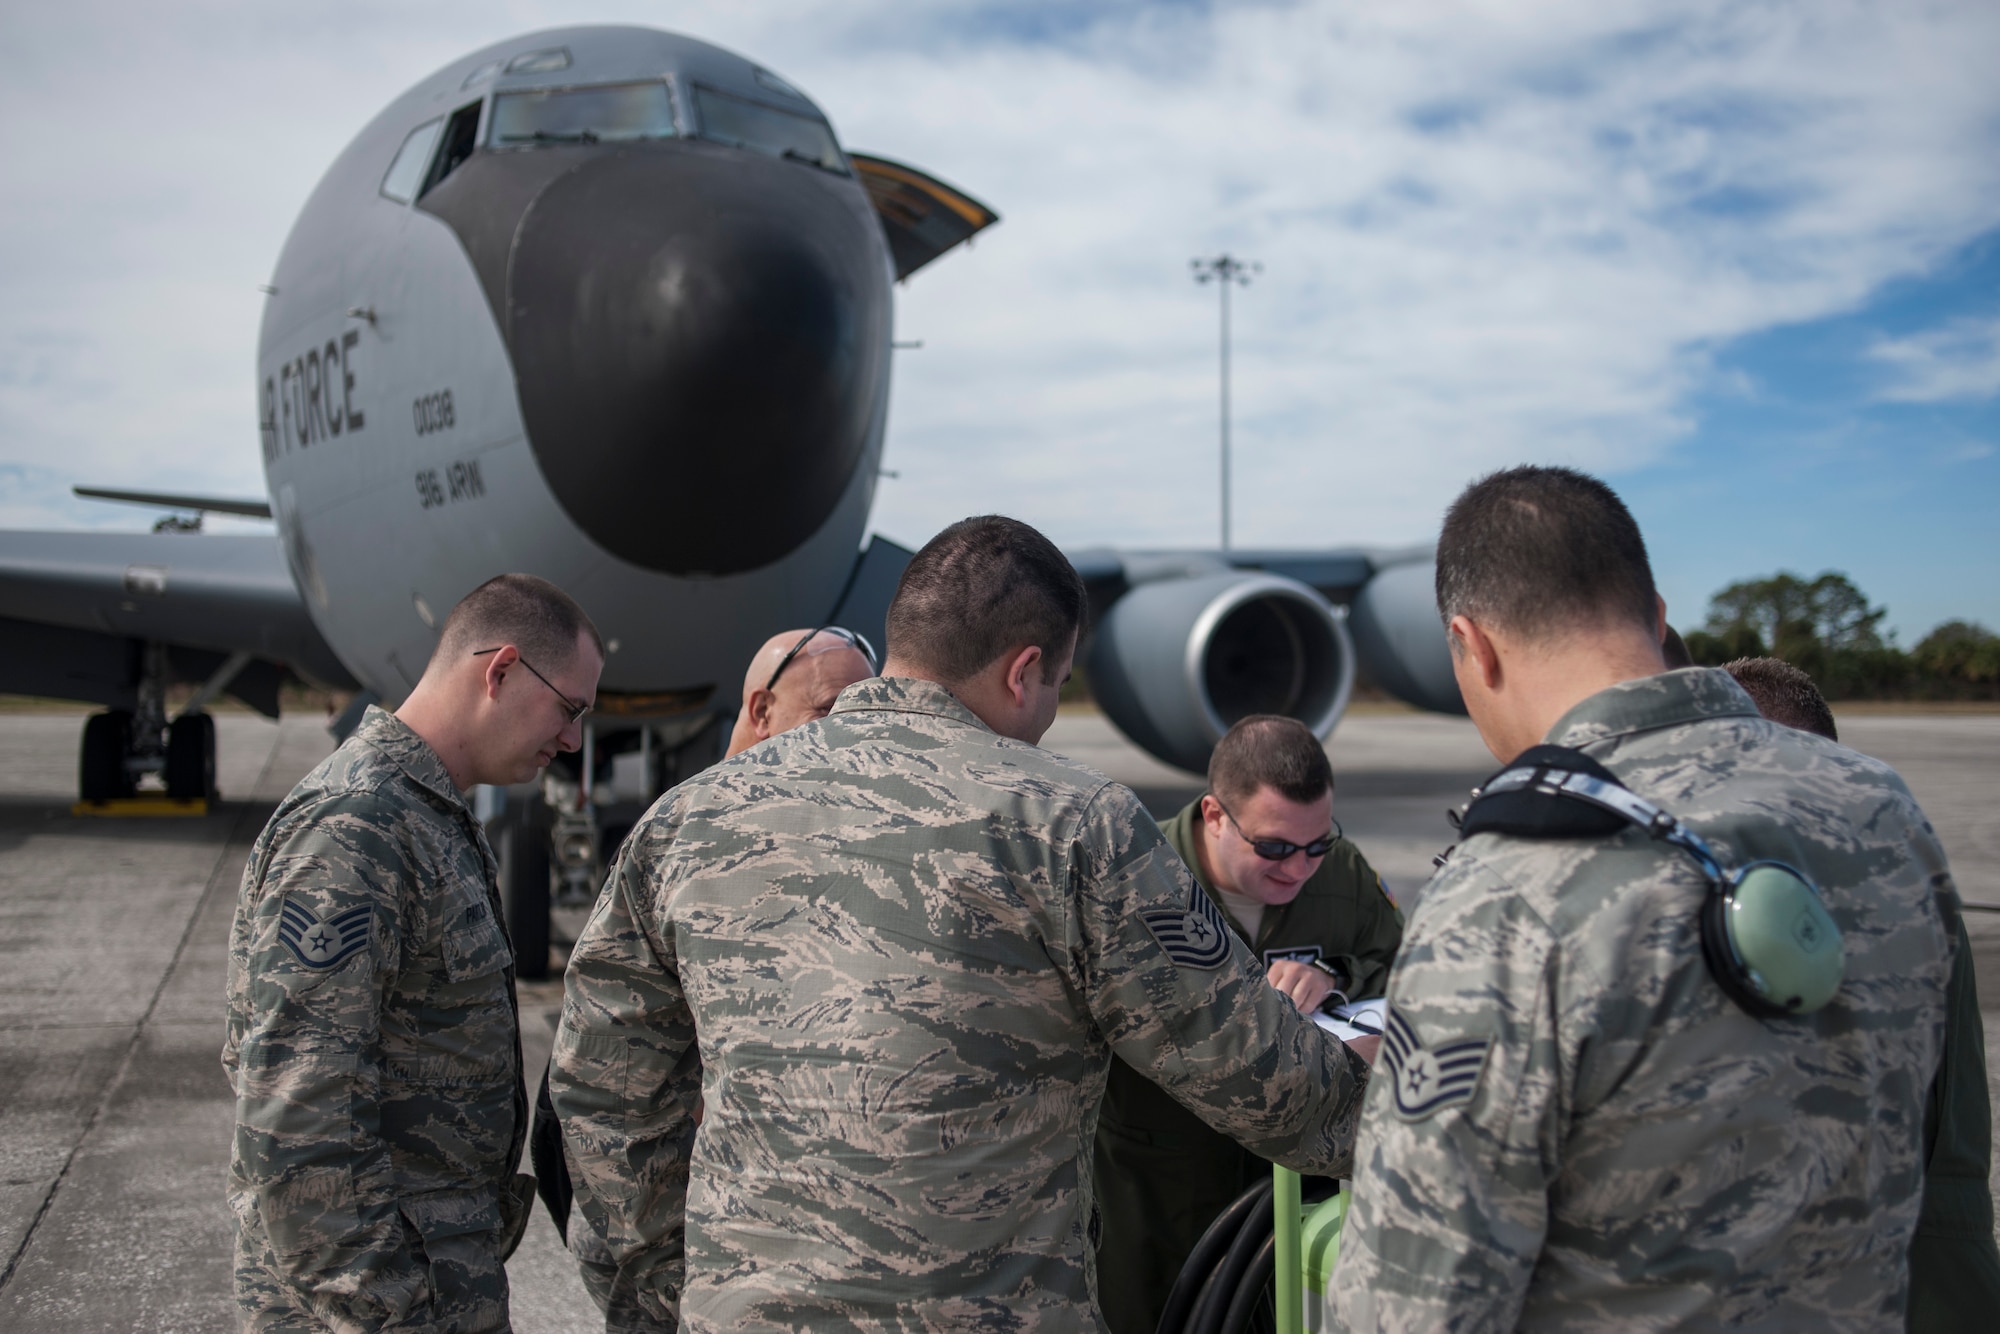 U.S. Air Force Airmen assigned to the 914th Air Refueling Wing (ARW) from Niagara Air Reserve Station, N.Y., review a mission brief prior to a refueling flight at MacDill Air Force Base, Fla., Jan. 30, 2018.